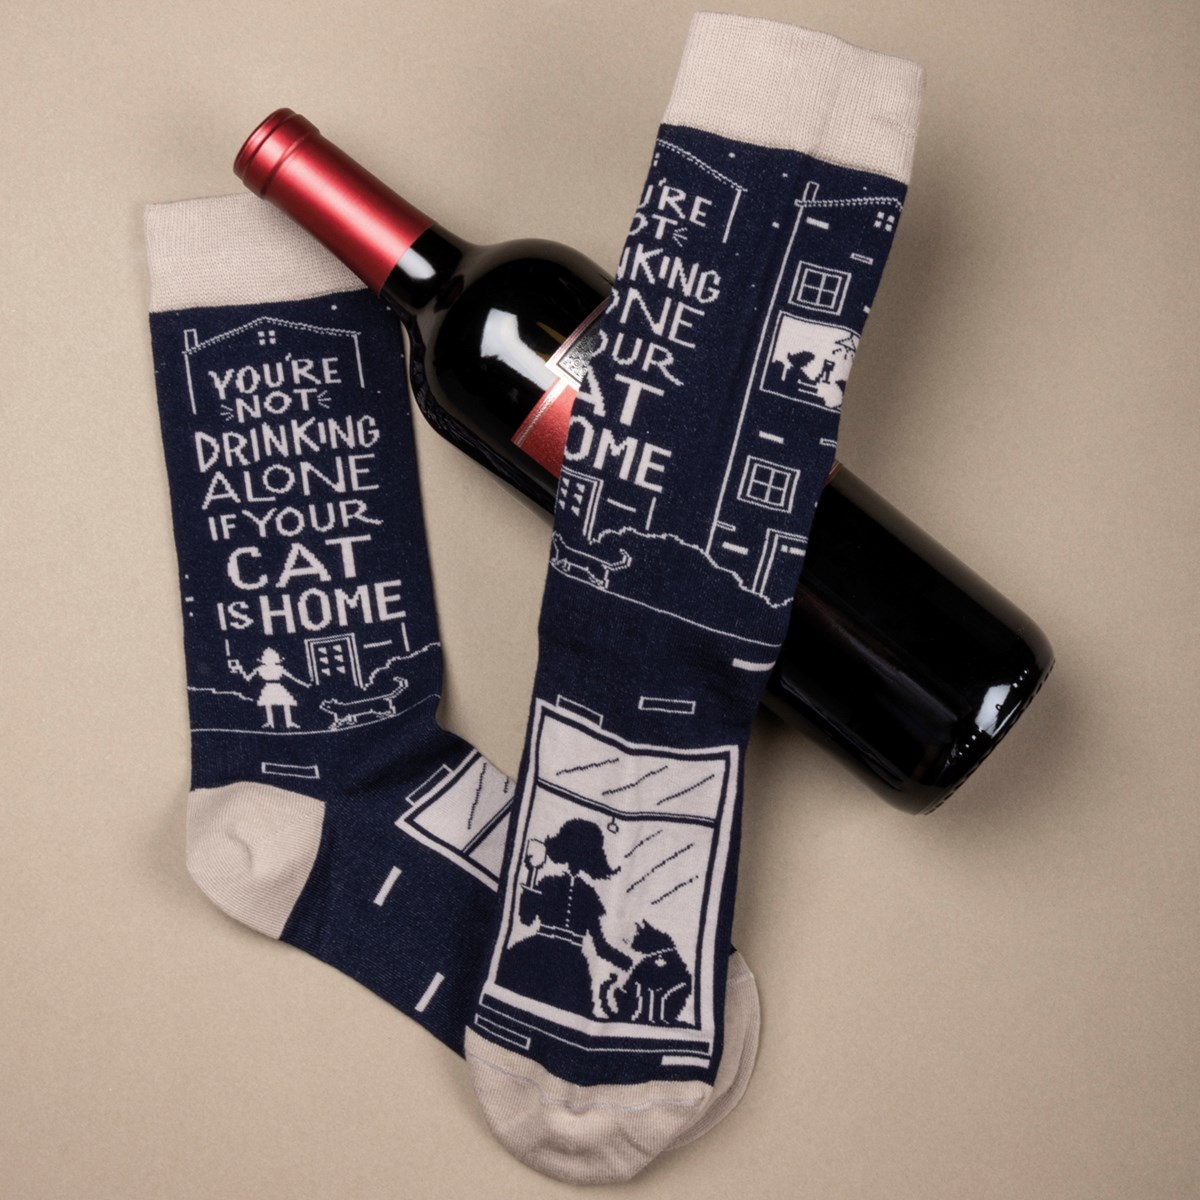 Not Drinking Alone If Your Cat Is Home Socks - Cotton, Nylon, Spandex